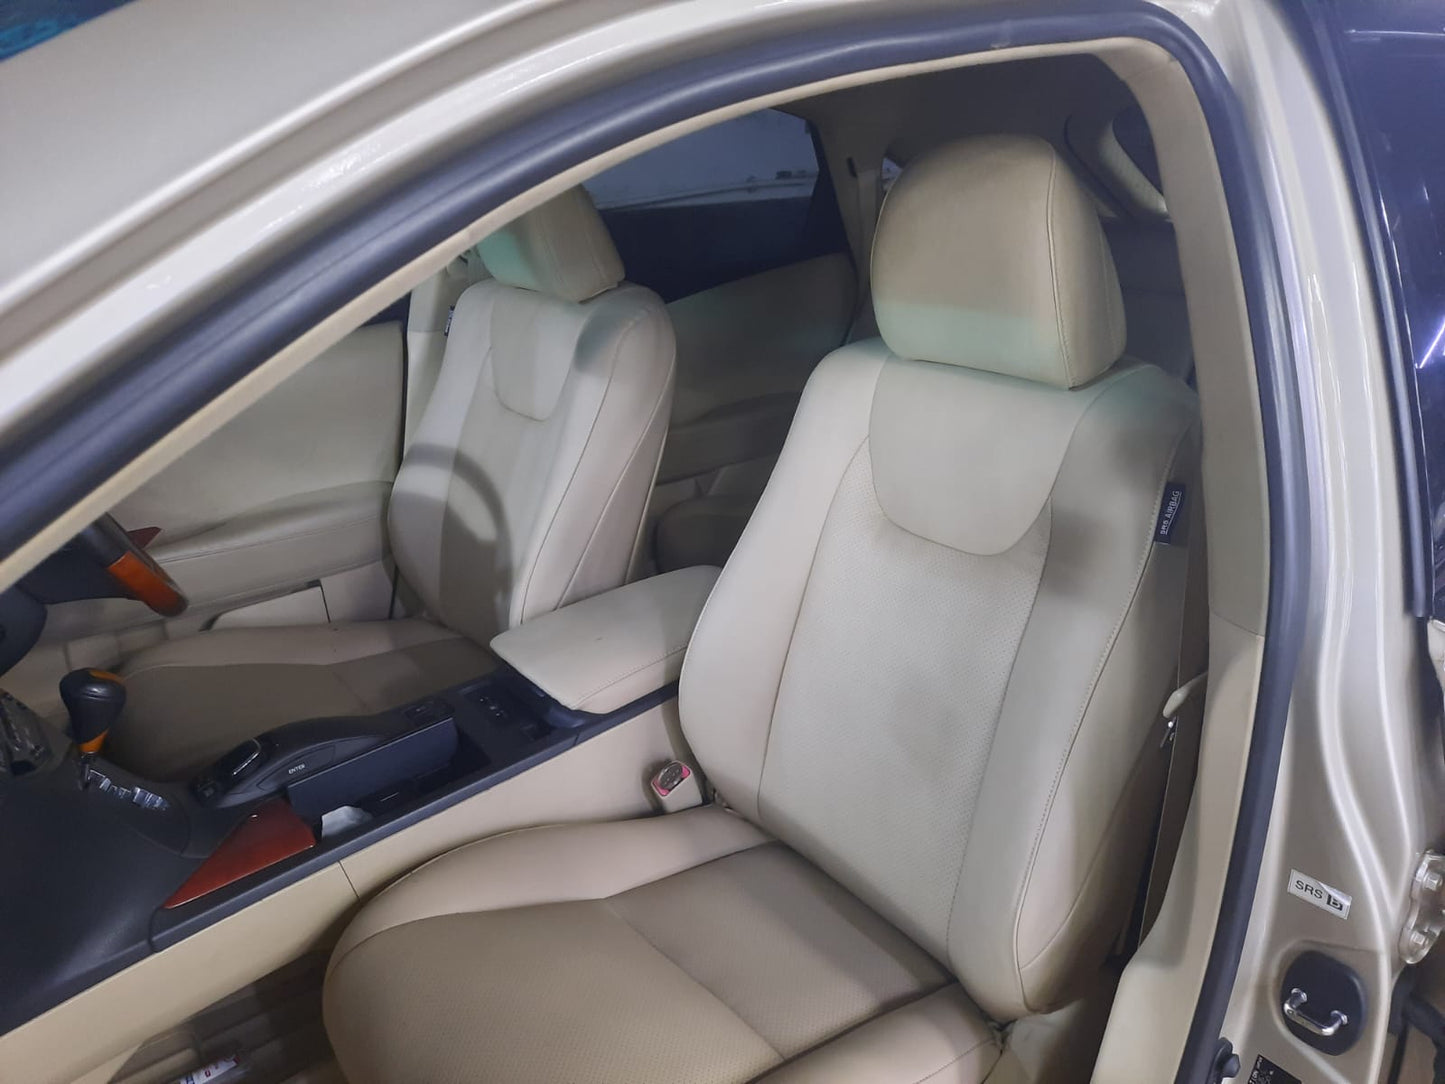 Lexus RX350 RX450h (Year: 2010 to 2015) Genuine Leather - Seat Covers (Full Set - Front & Rear seats + back with Headrest, Center console / Armrest)